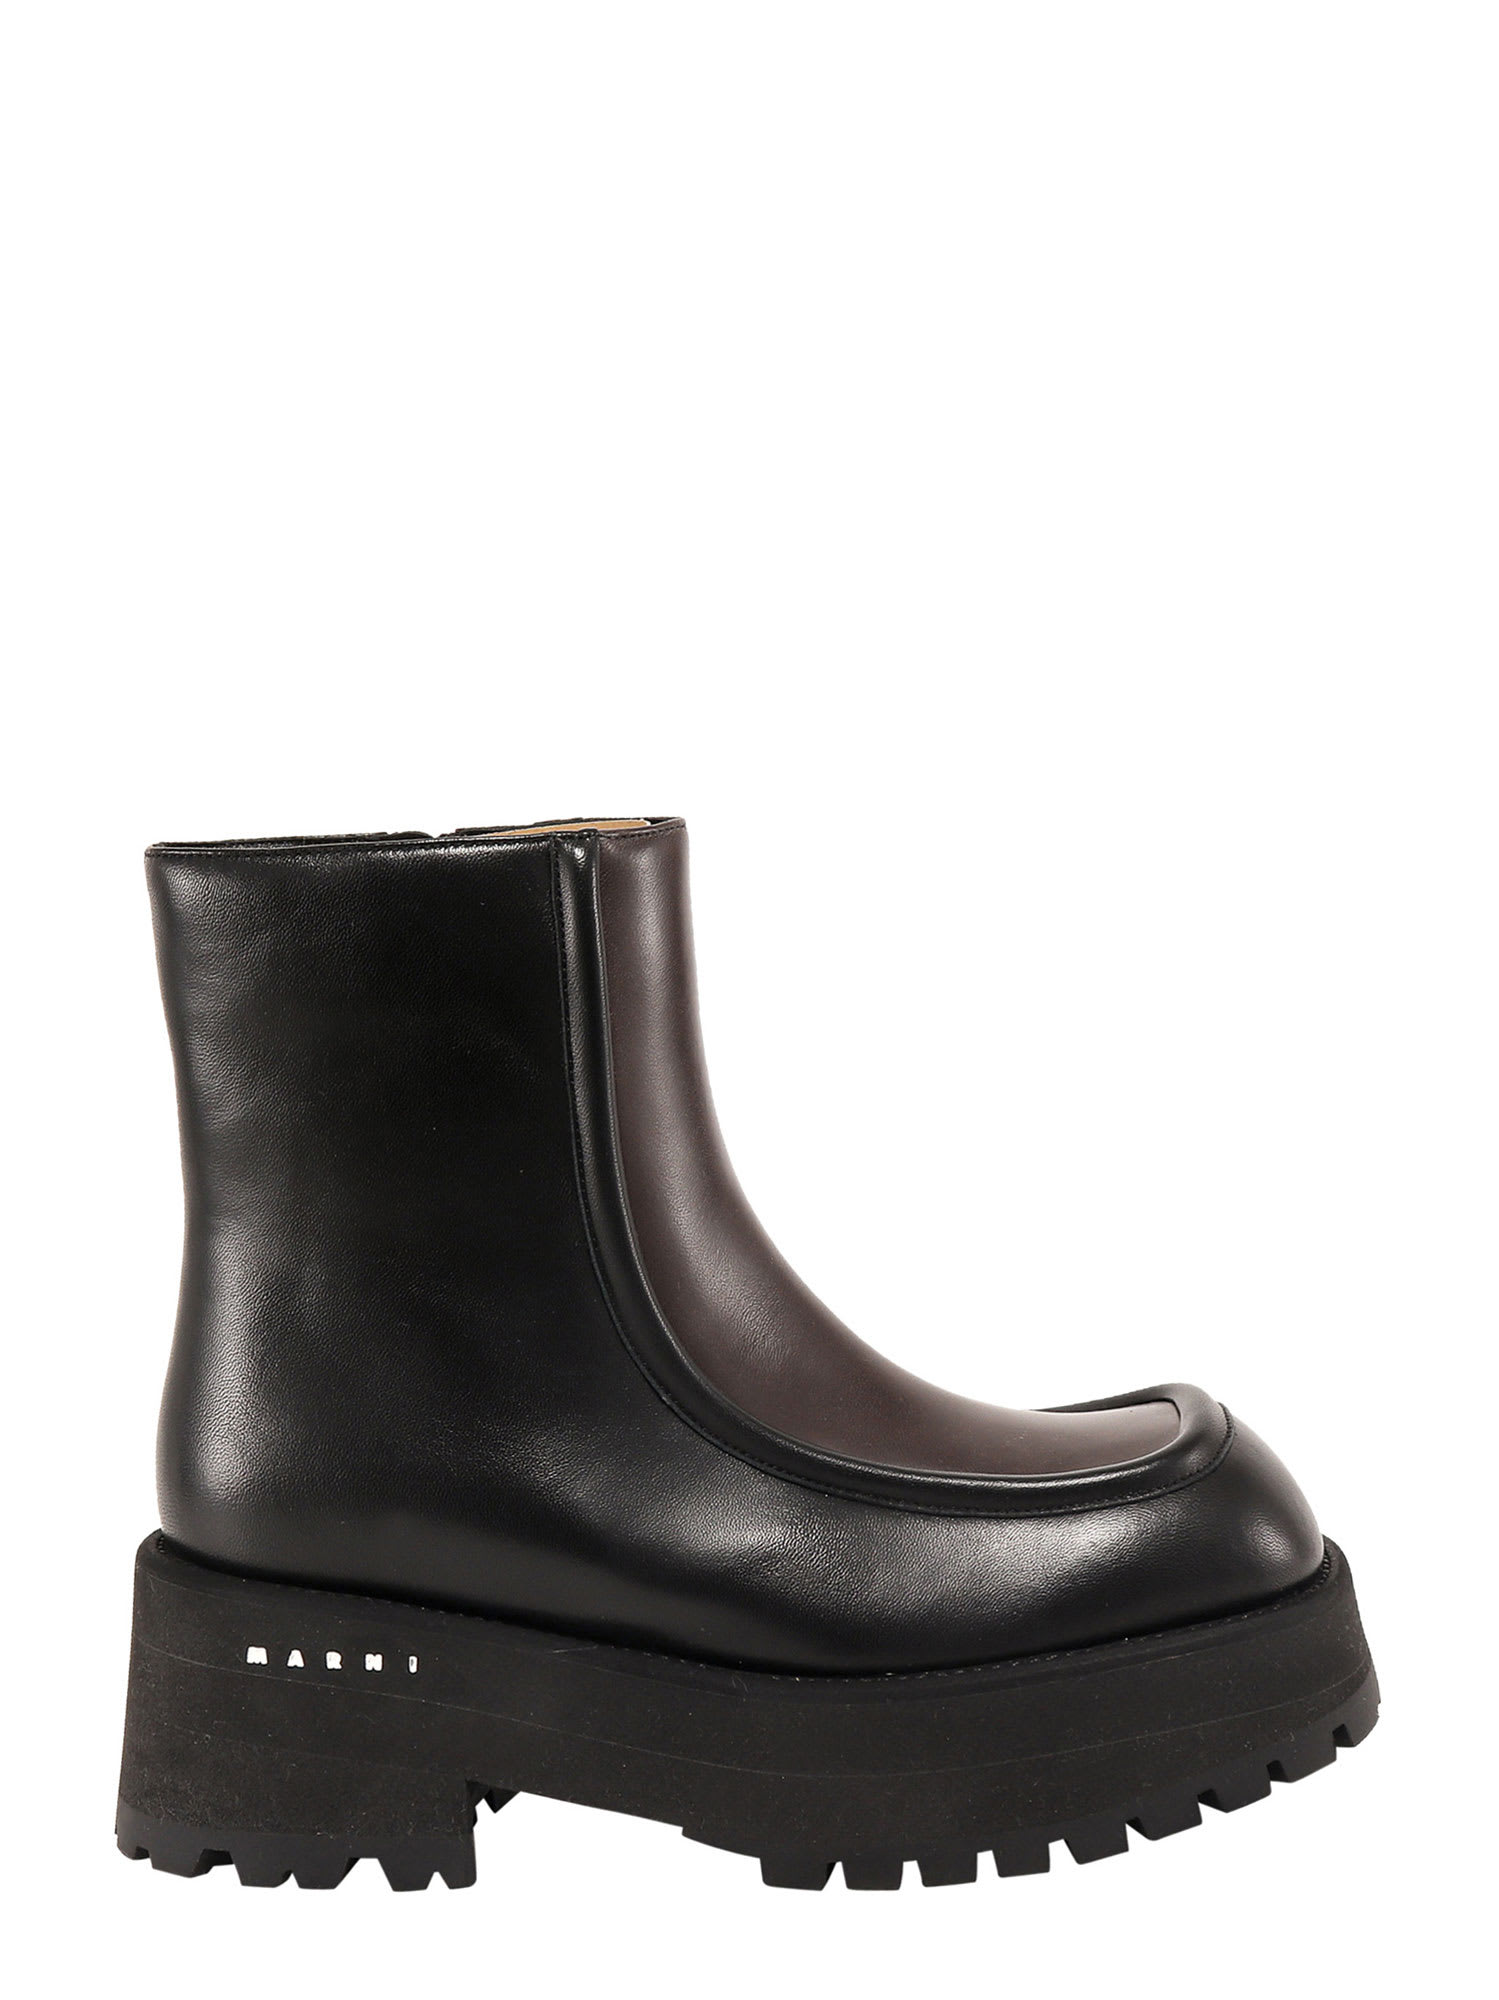 Buy Marni Ankle Boots online, shop Marni shoes with free shipping